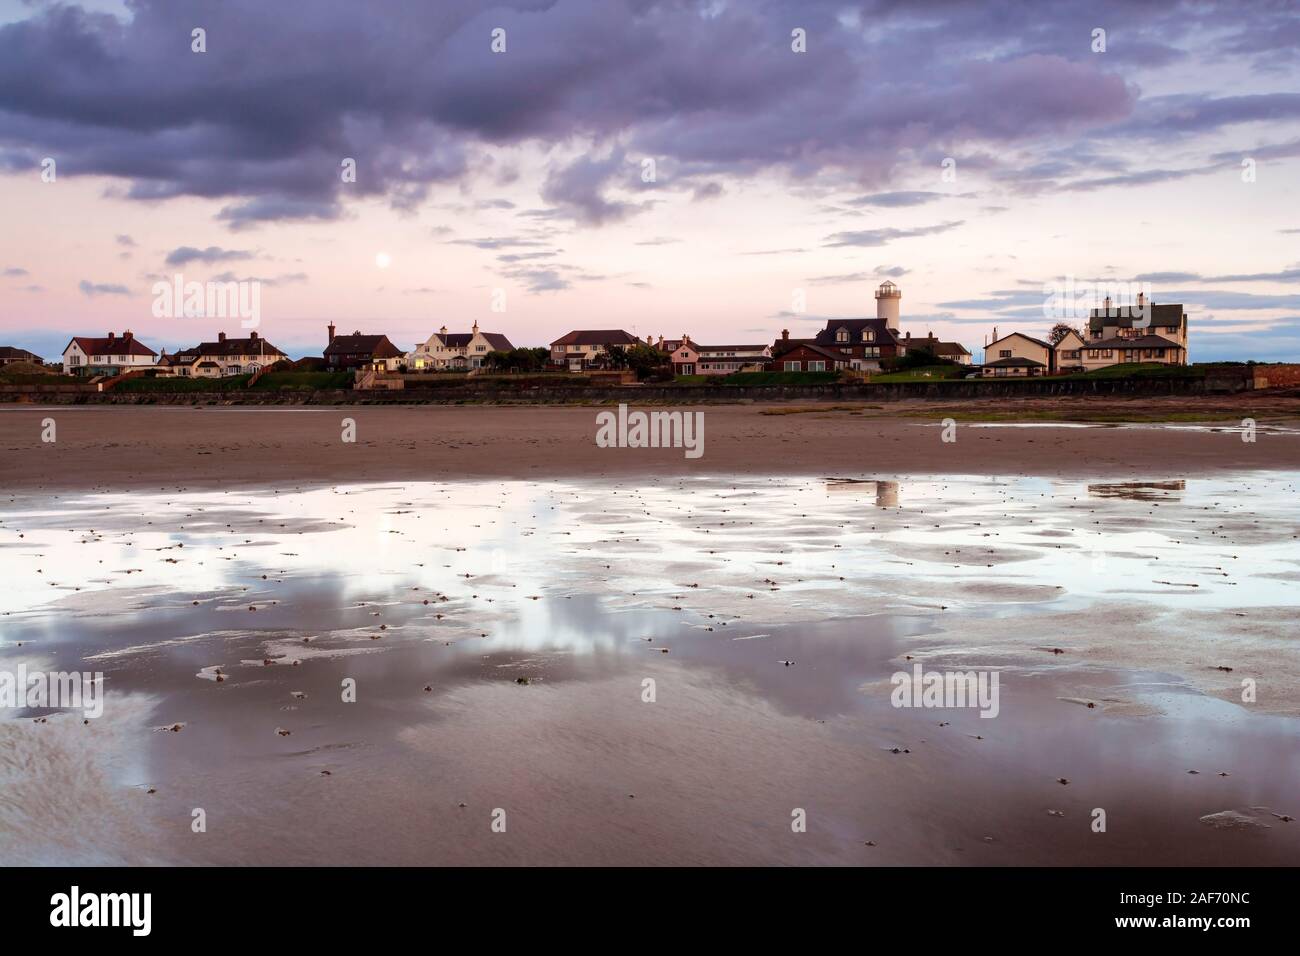 An evening view of West Kirby on the Wirral Peninsula. Stock Photo